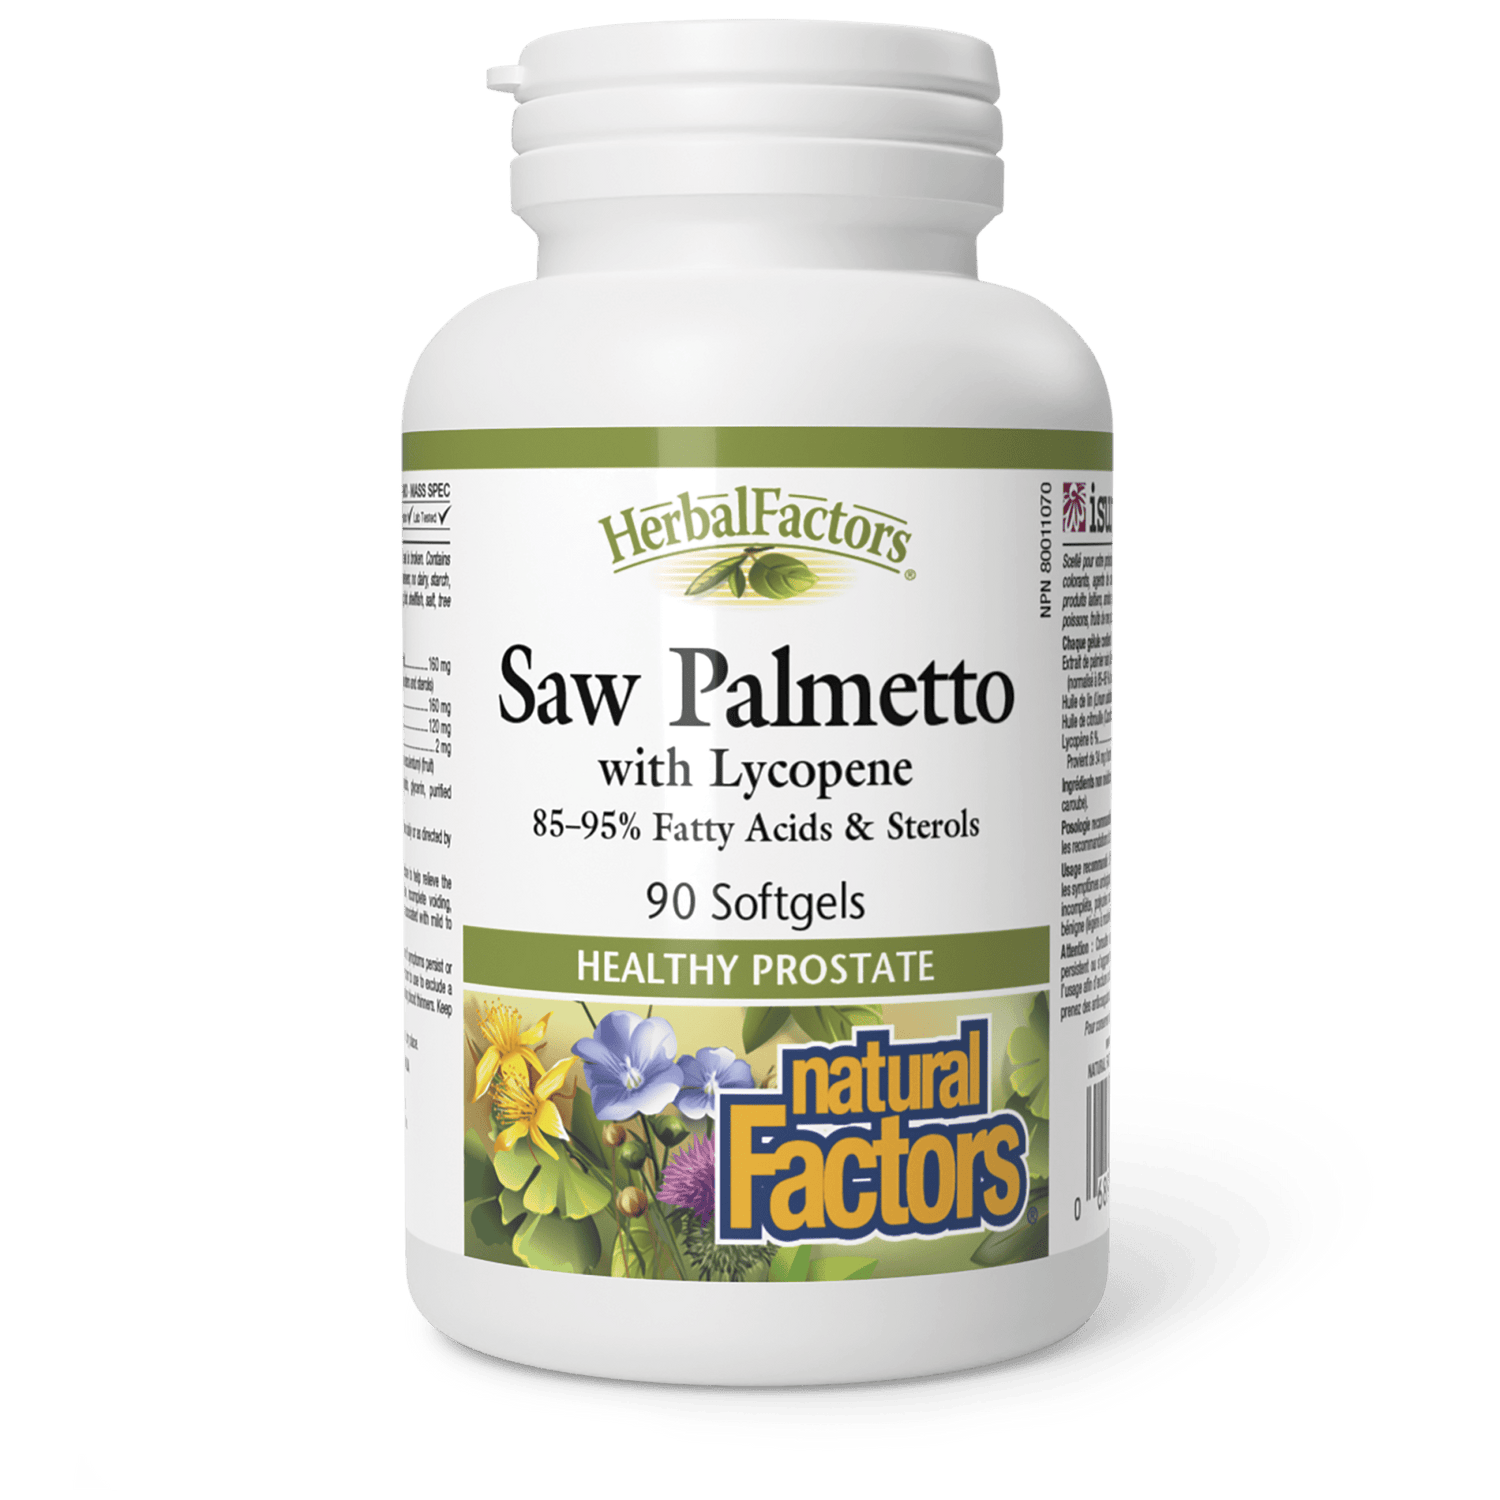 Saw Palmetto with Lycopene, HerbalFactors, Natural Factors|v|image|4552